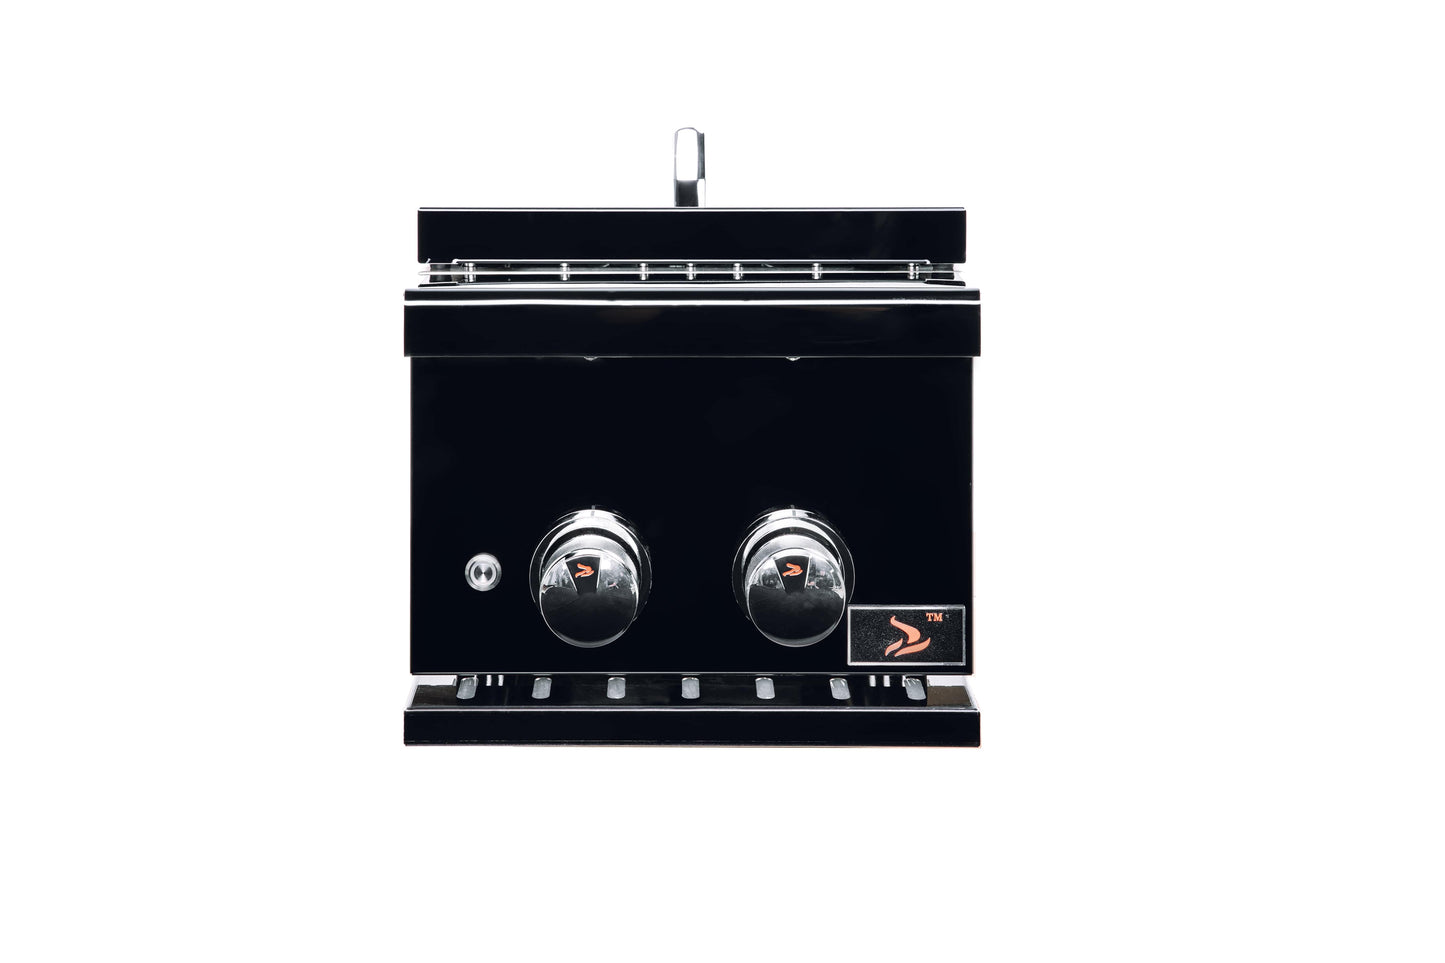 Bonfire Stainless Steel built-in side burner for outdoor kitchen Black Series - CBAPDSB-B - Front View